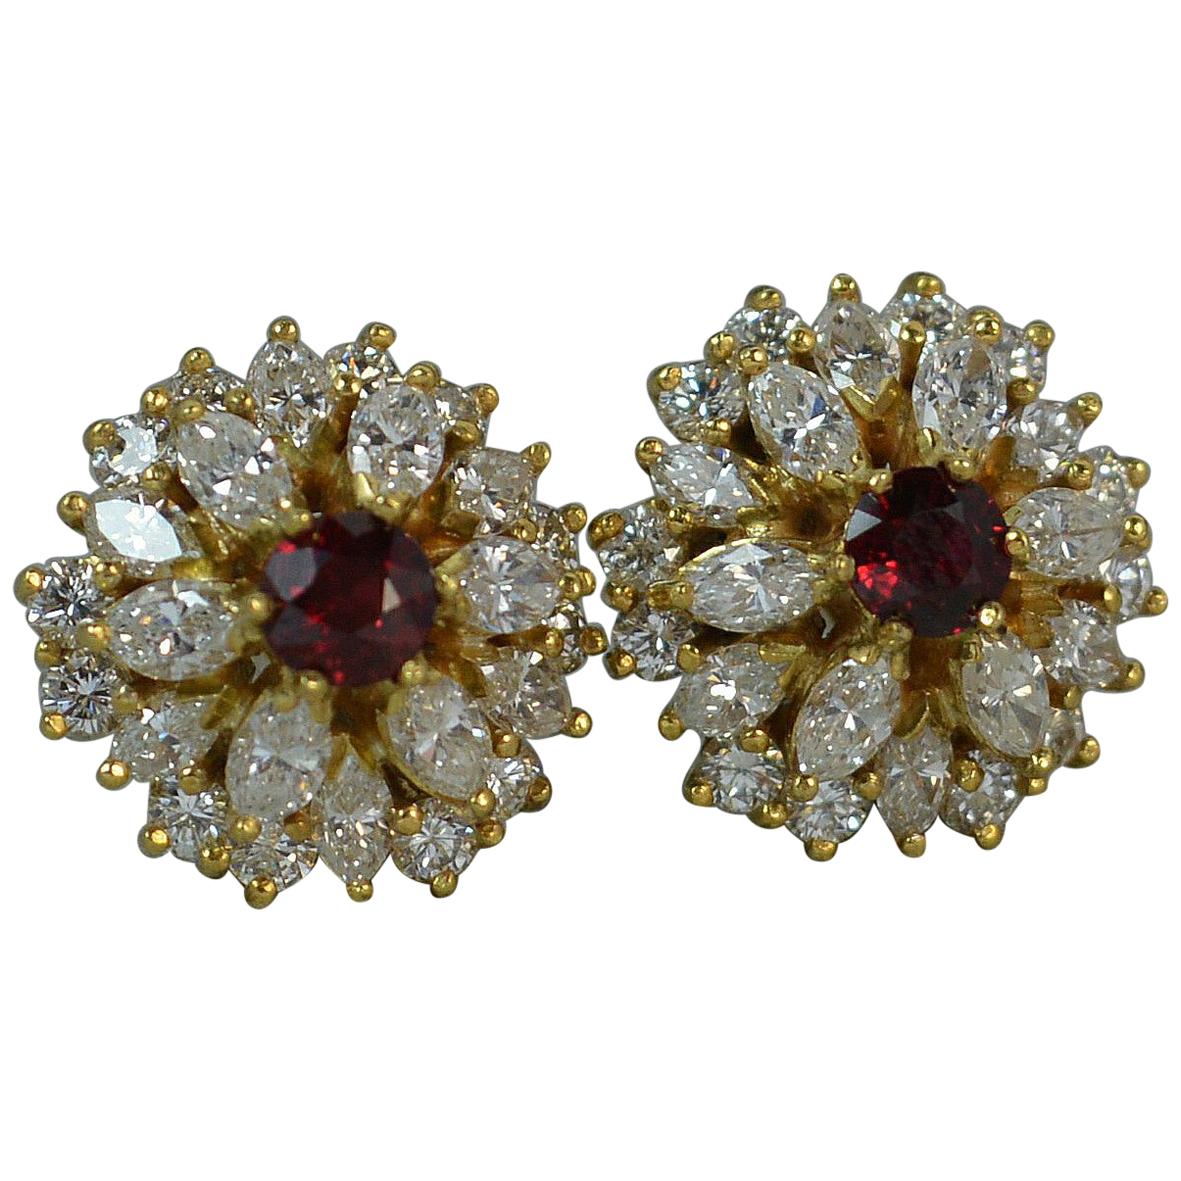 18 Carat Gold 2.8 Carat Vs Diamond and Ruby Cluster Earrings